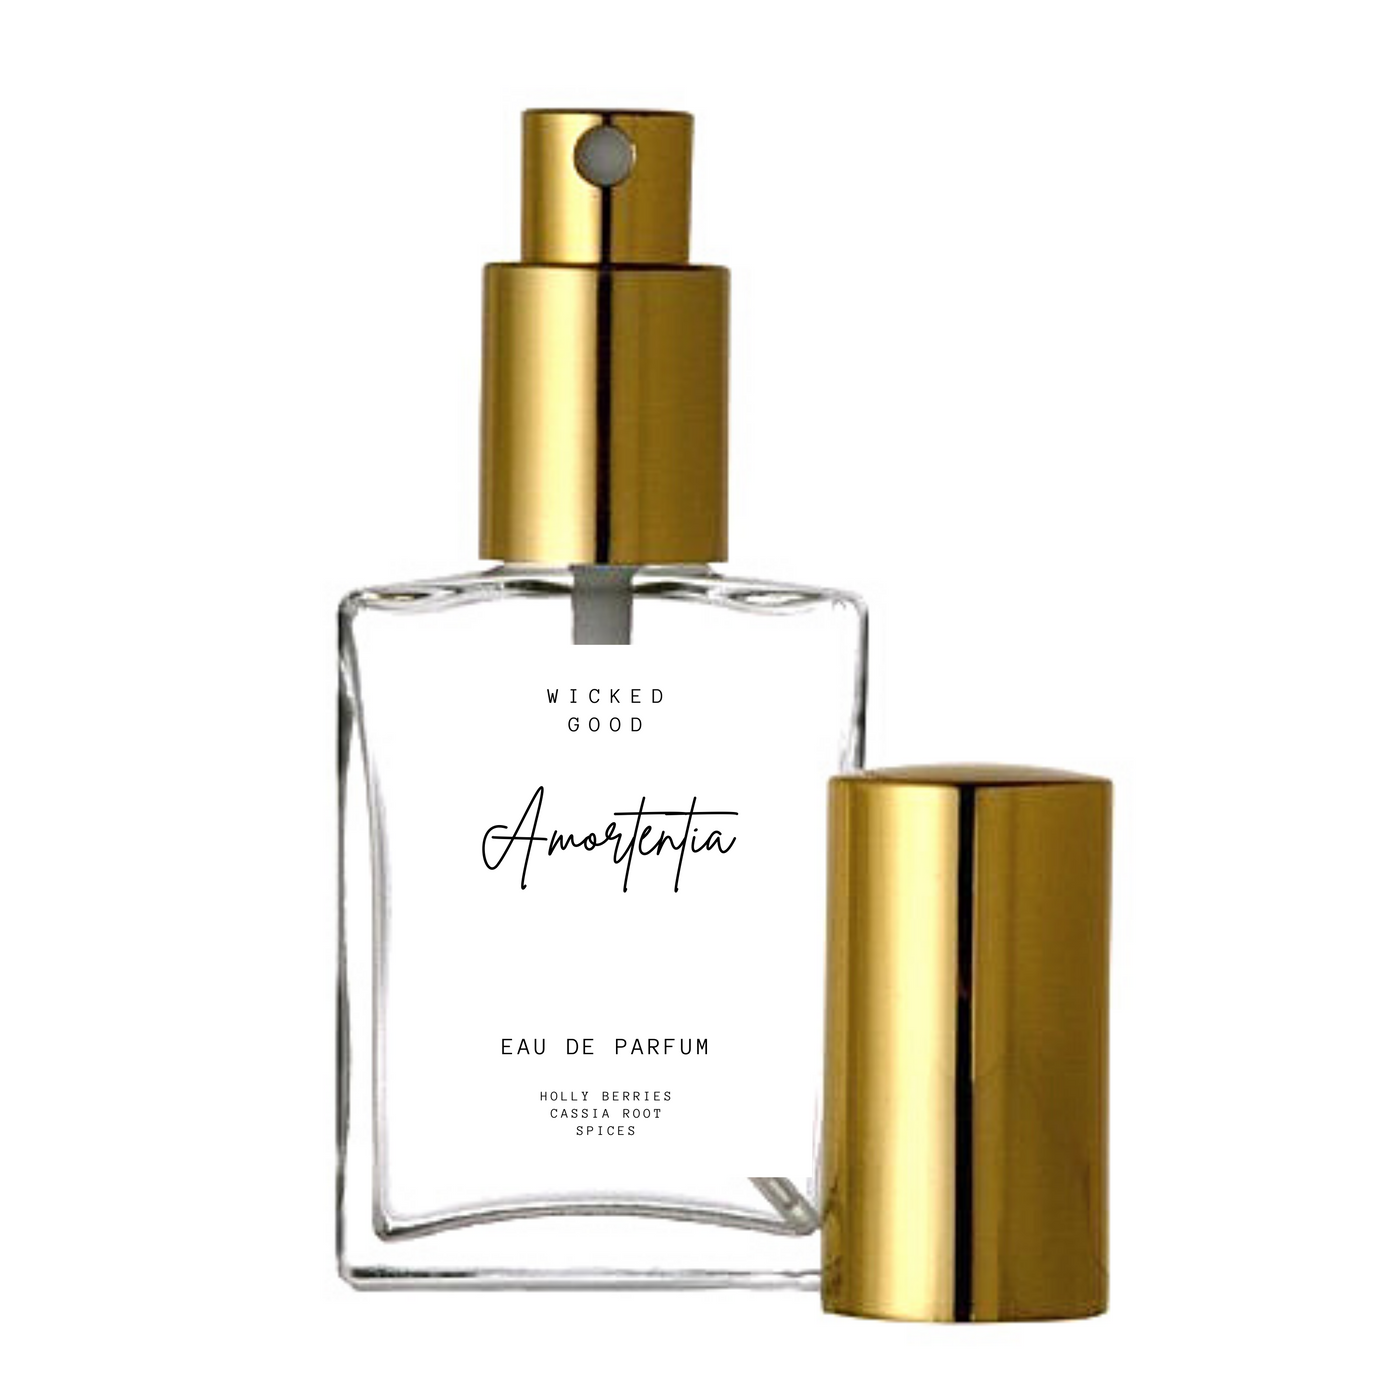 Amortentia Perfume | 13 Magical Harry Potter Gifts Potterheads Will Love